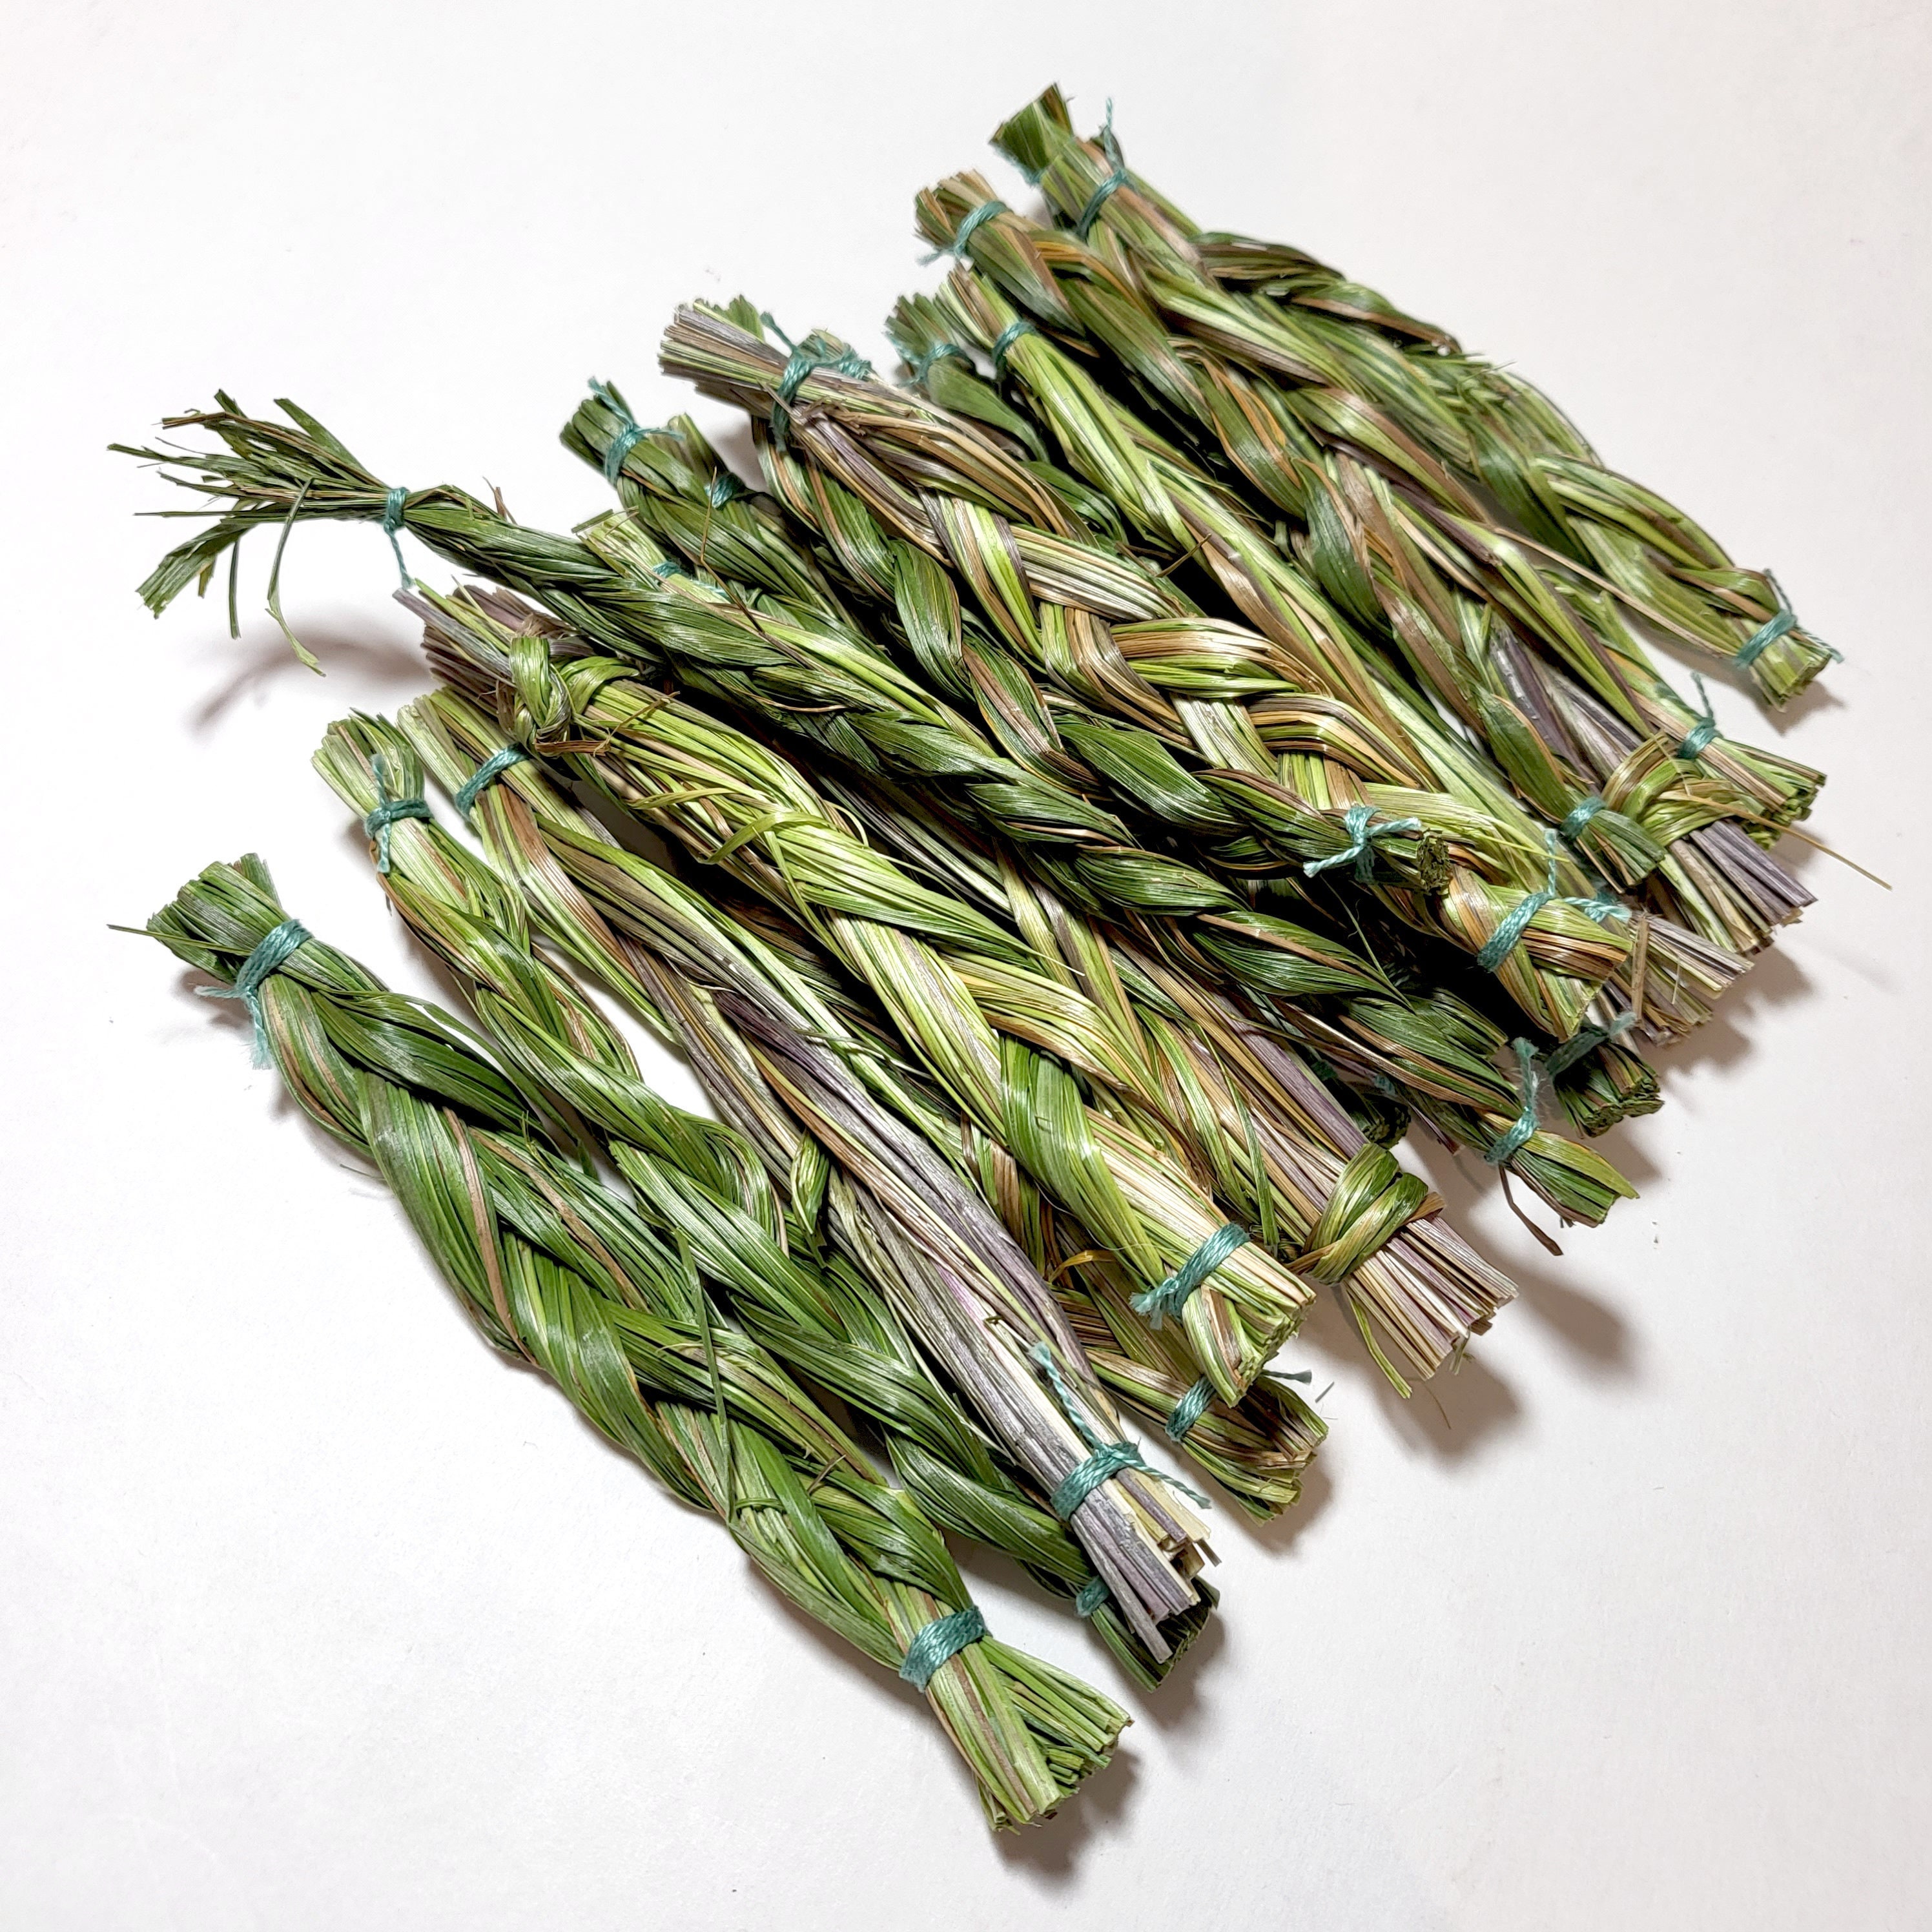 Many Native tribes in North America use sweetgrass in prayer, smudging or  purifying ceremonies and consider it a sacred plant.